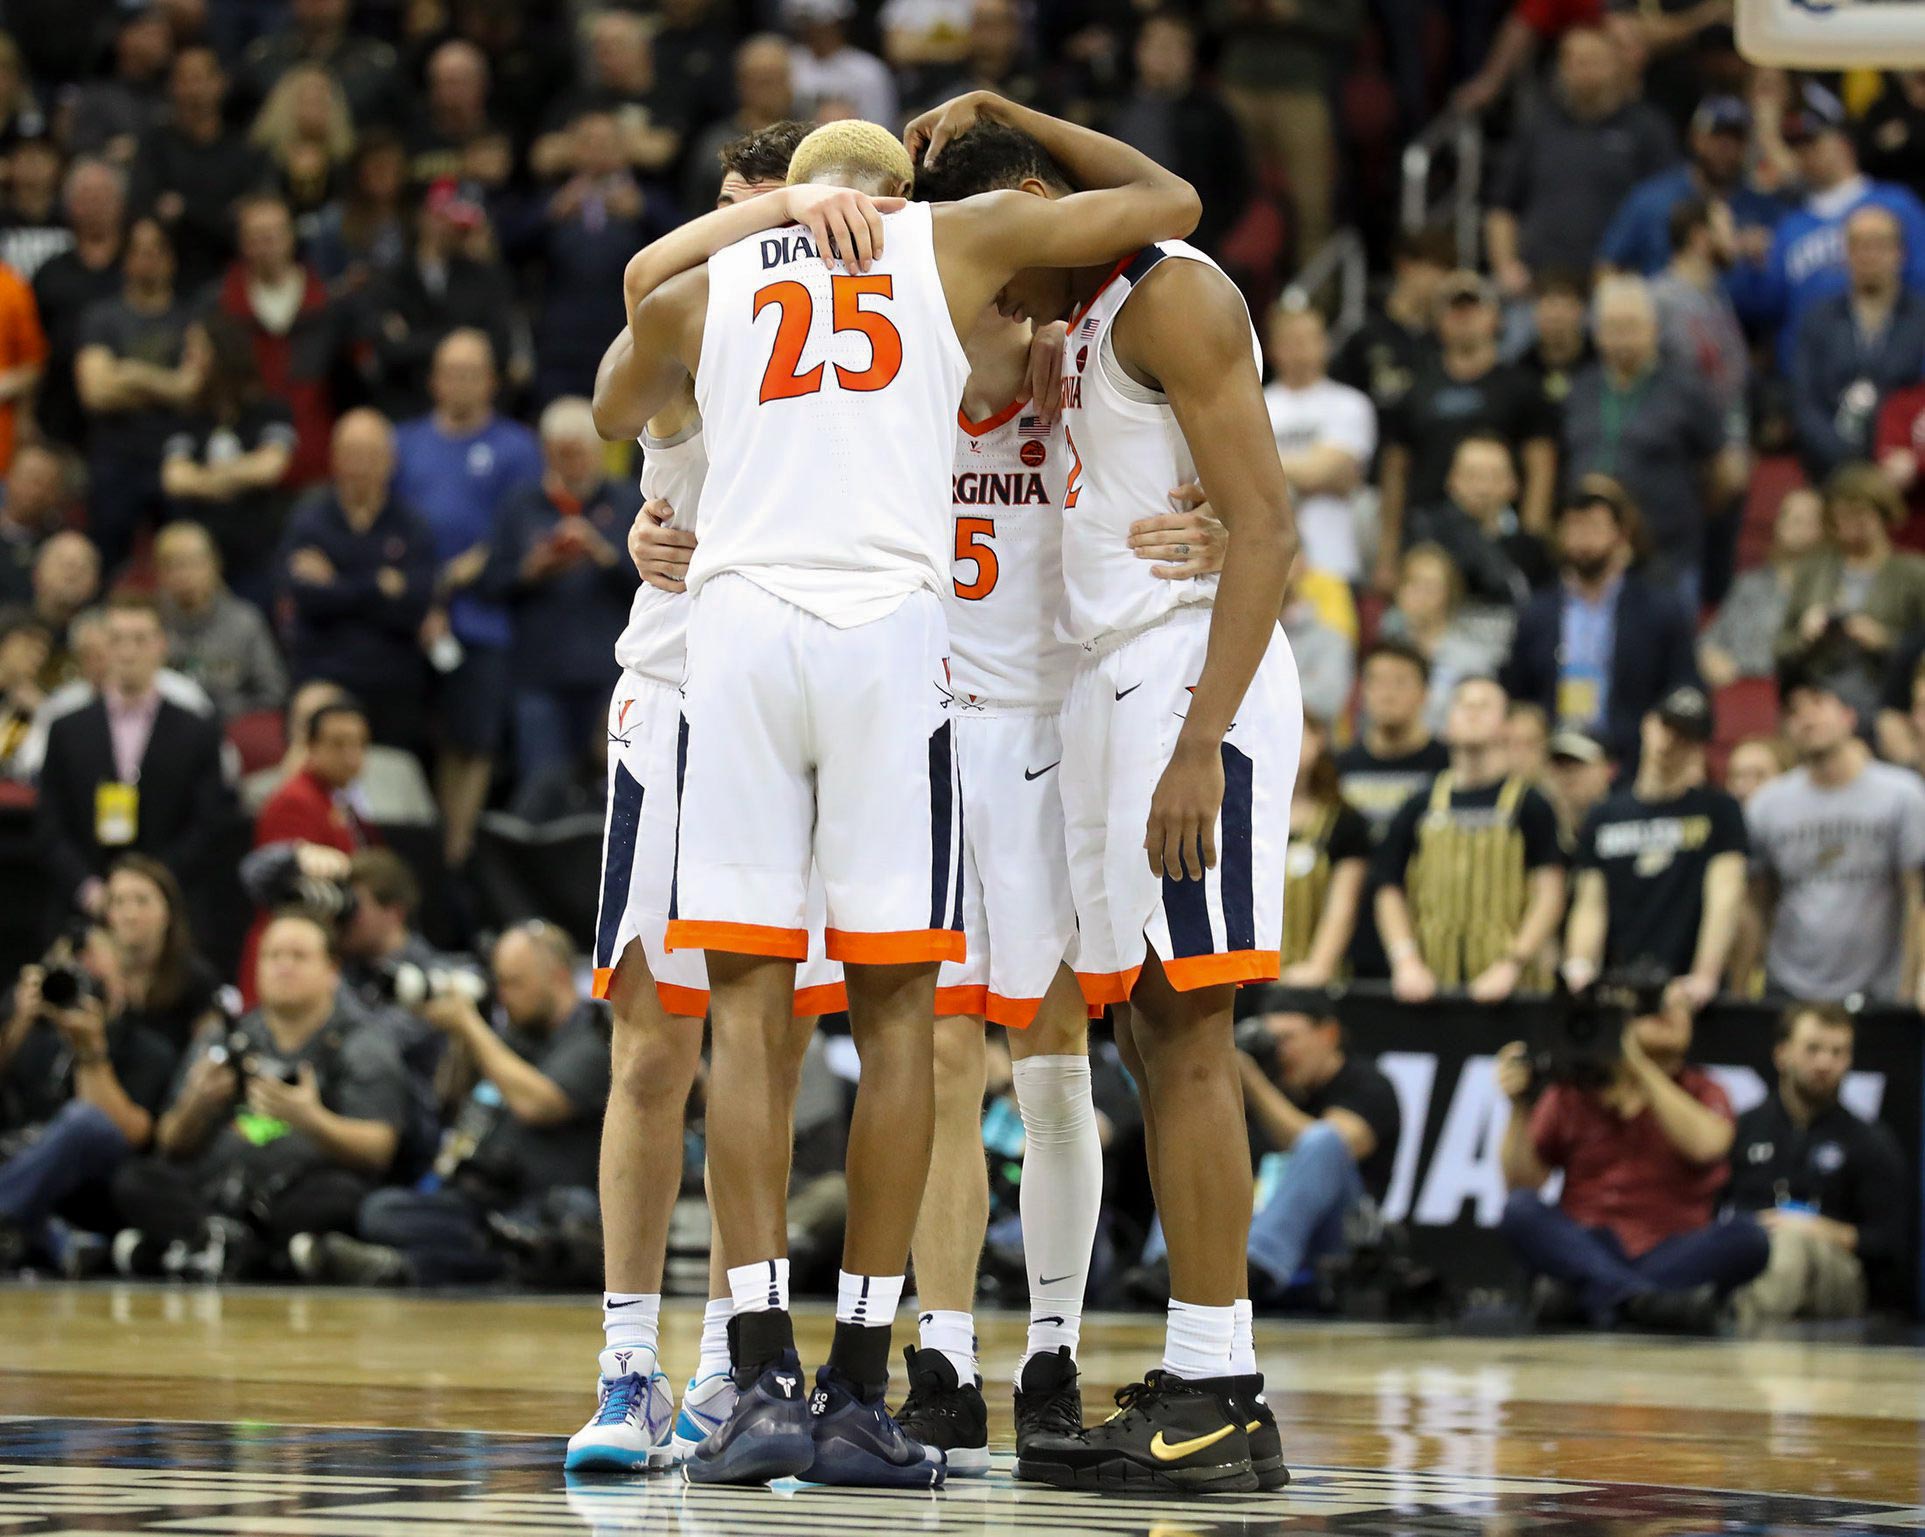 UVA basketball players huddled up during the game